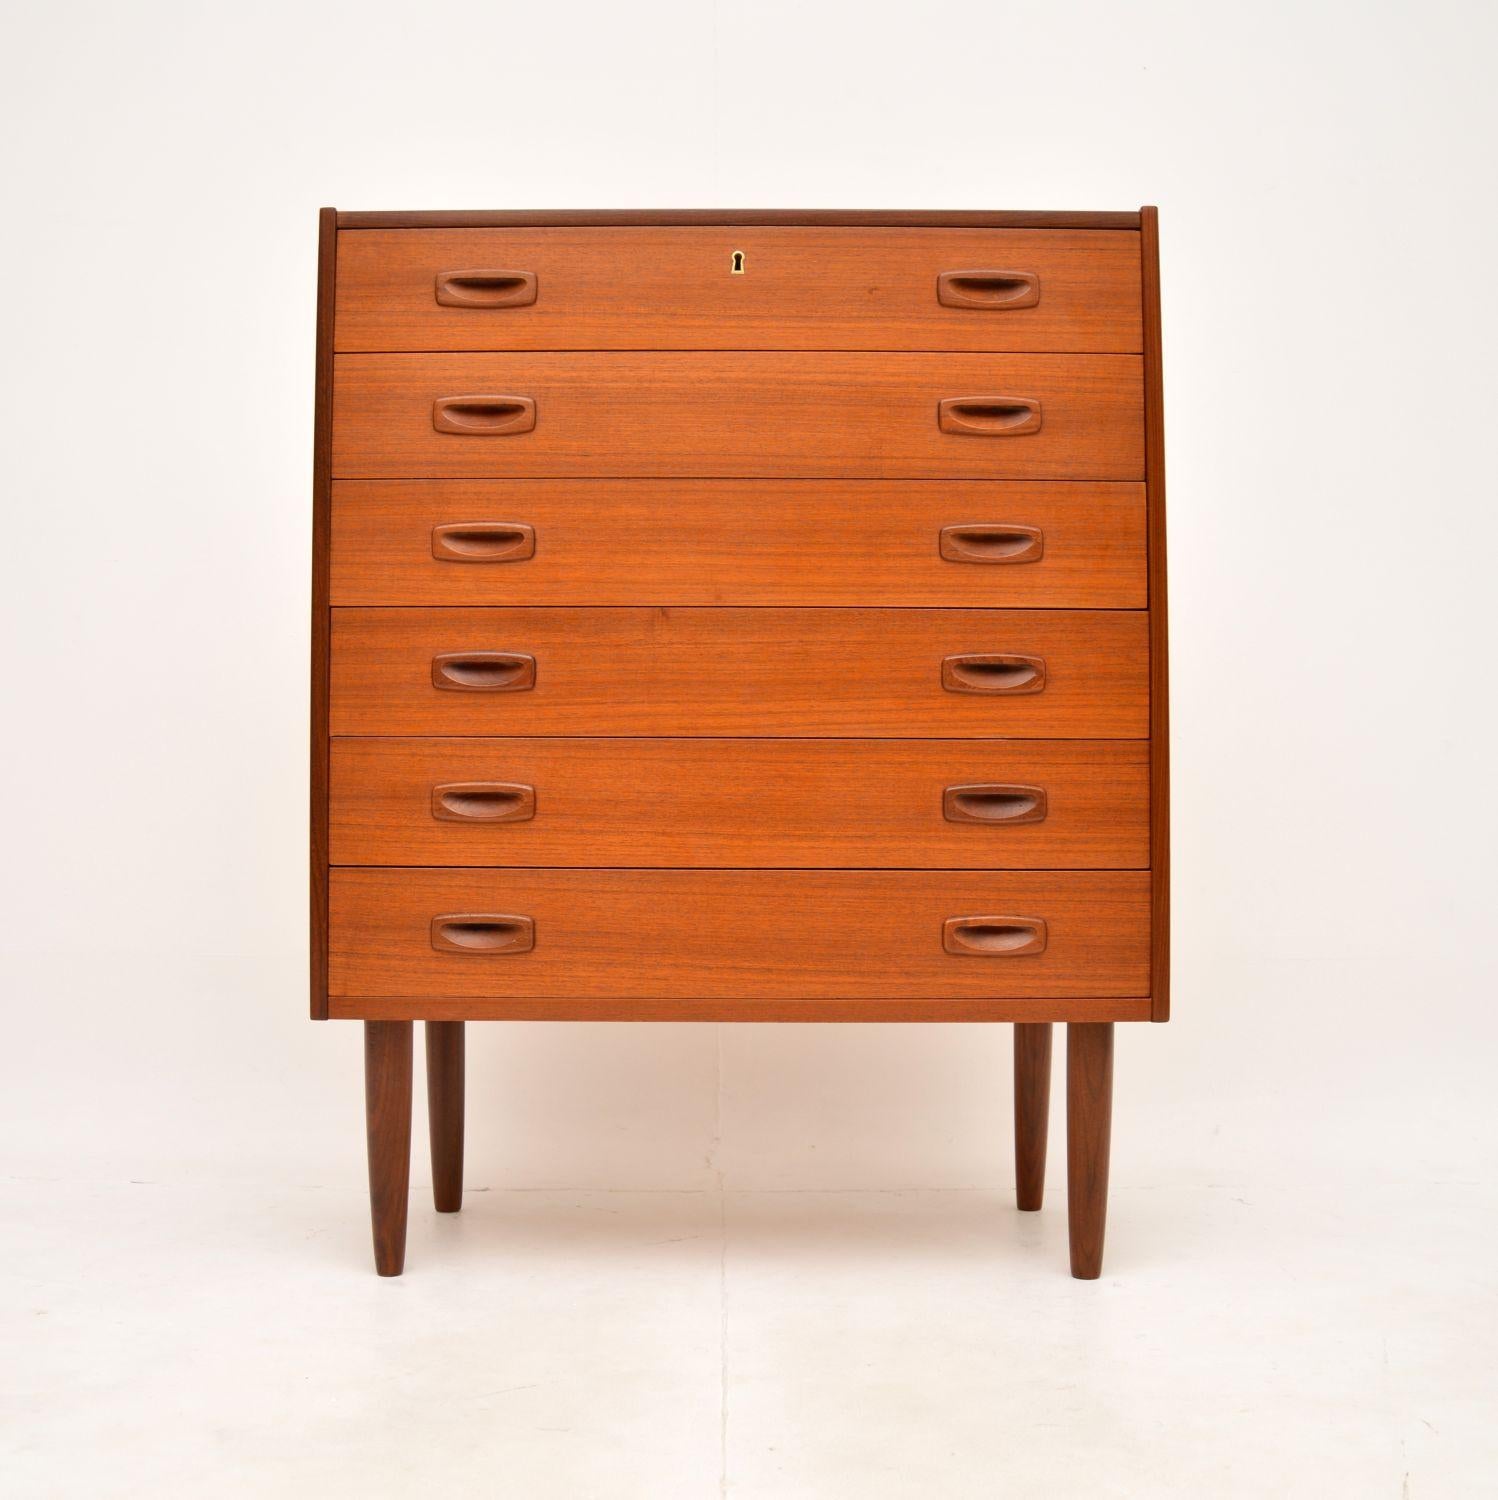 A stylish, very well made and very practical Danish vintage teak chest of drawers, dating from the 1960’s.

This is of superb quality, it is beautifully designed and contains lots of storage space. The drawers have lovely sculptural solid teak